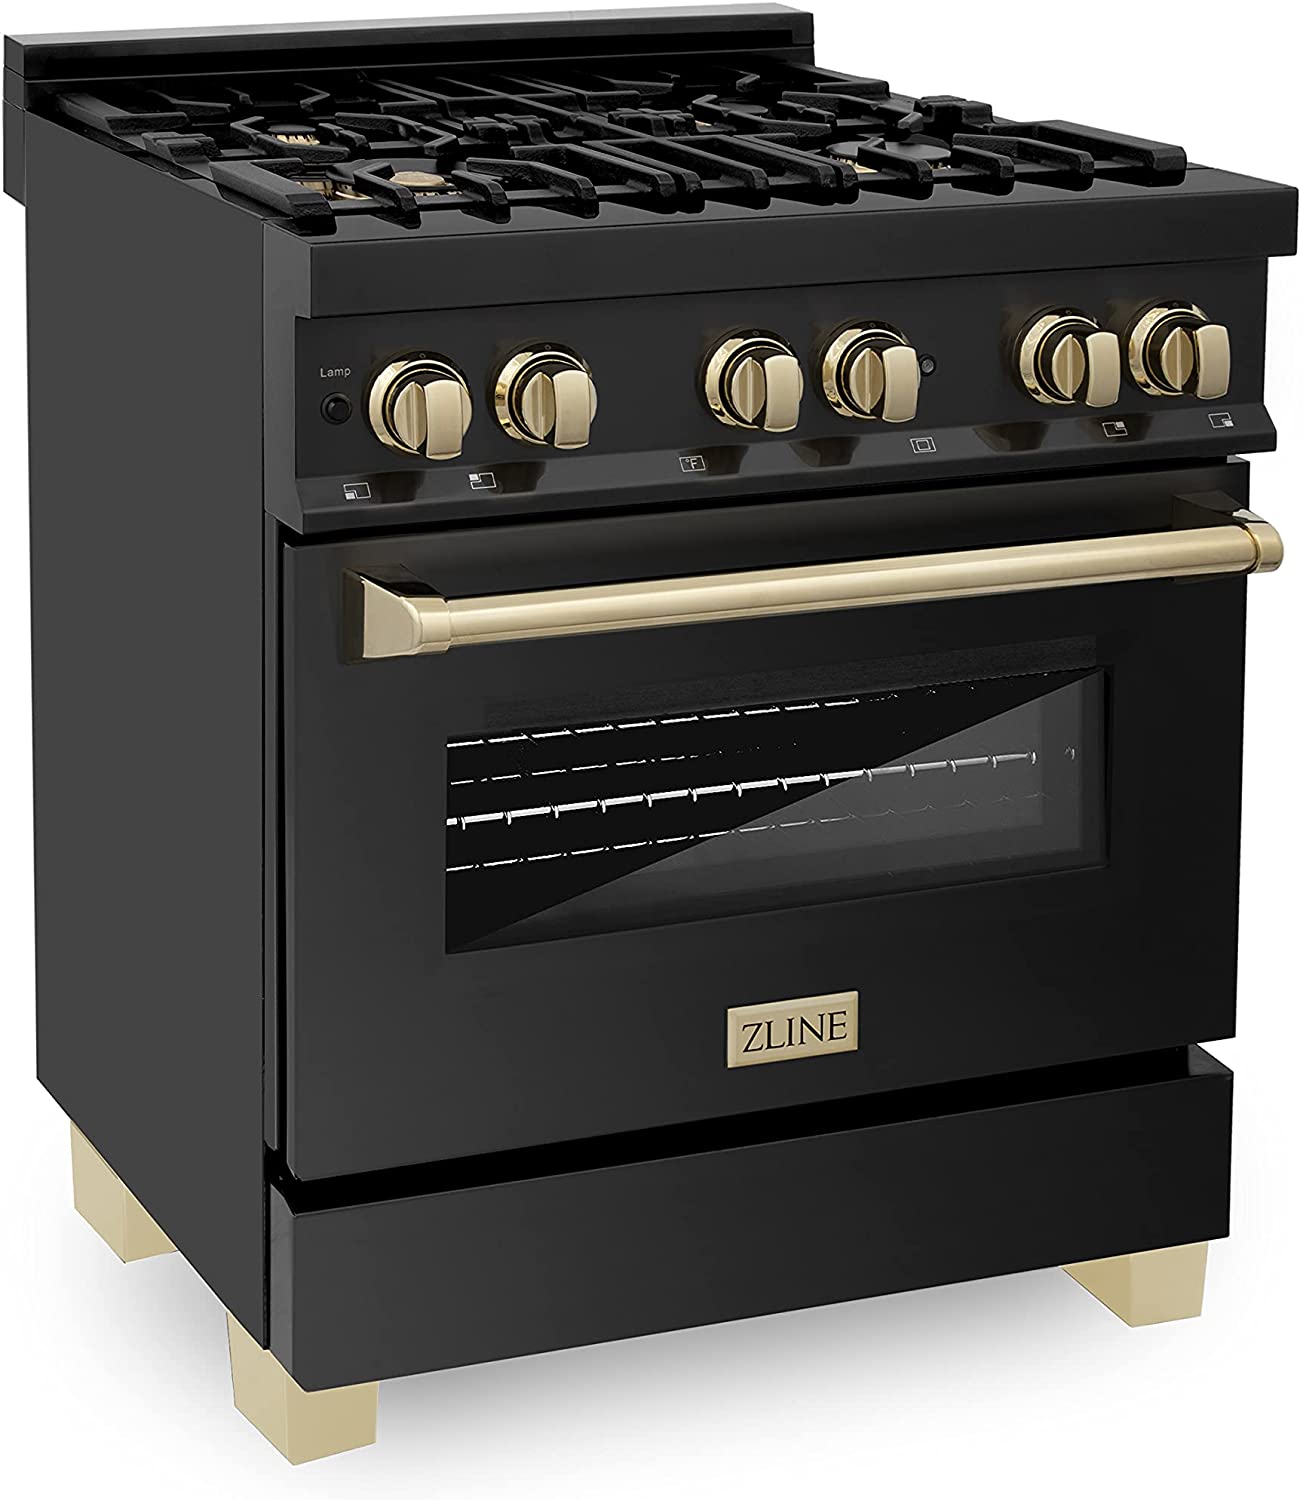 ZLINE Autograph Edition 30 4.0 Cu. ft. Dual Fuel Range with GAS Stove and Electric Oven in Stainless Steel with White Matte Door and Gold Accents